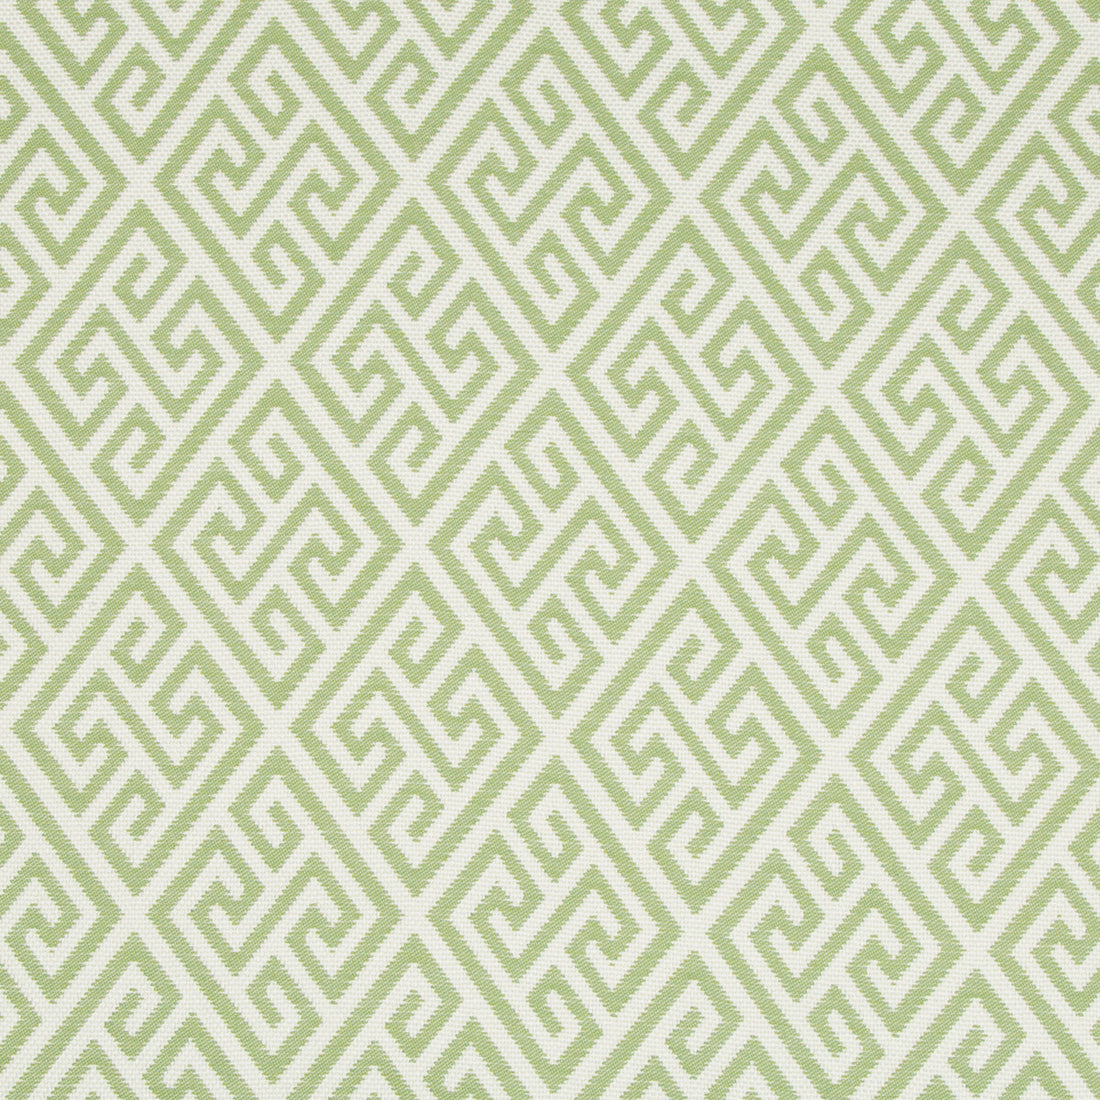 Cap Martin Woven fabric in kiwi color - pattern 8017150.3.0 - by Brunschwig &amp; Fils in the En Vacances collection